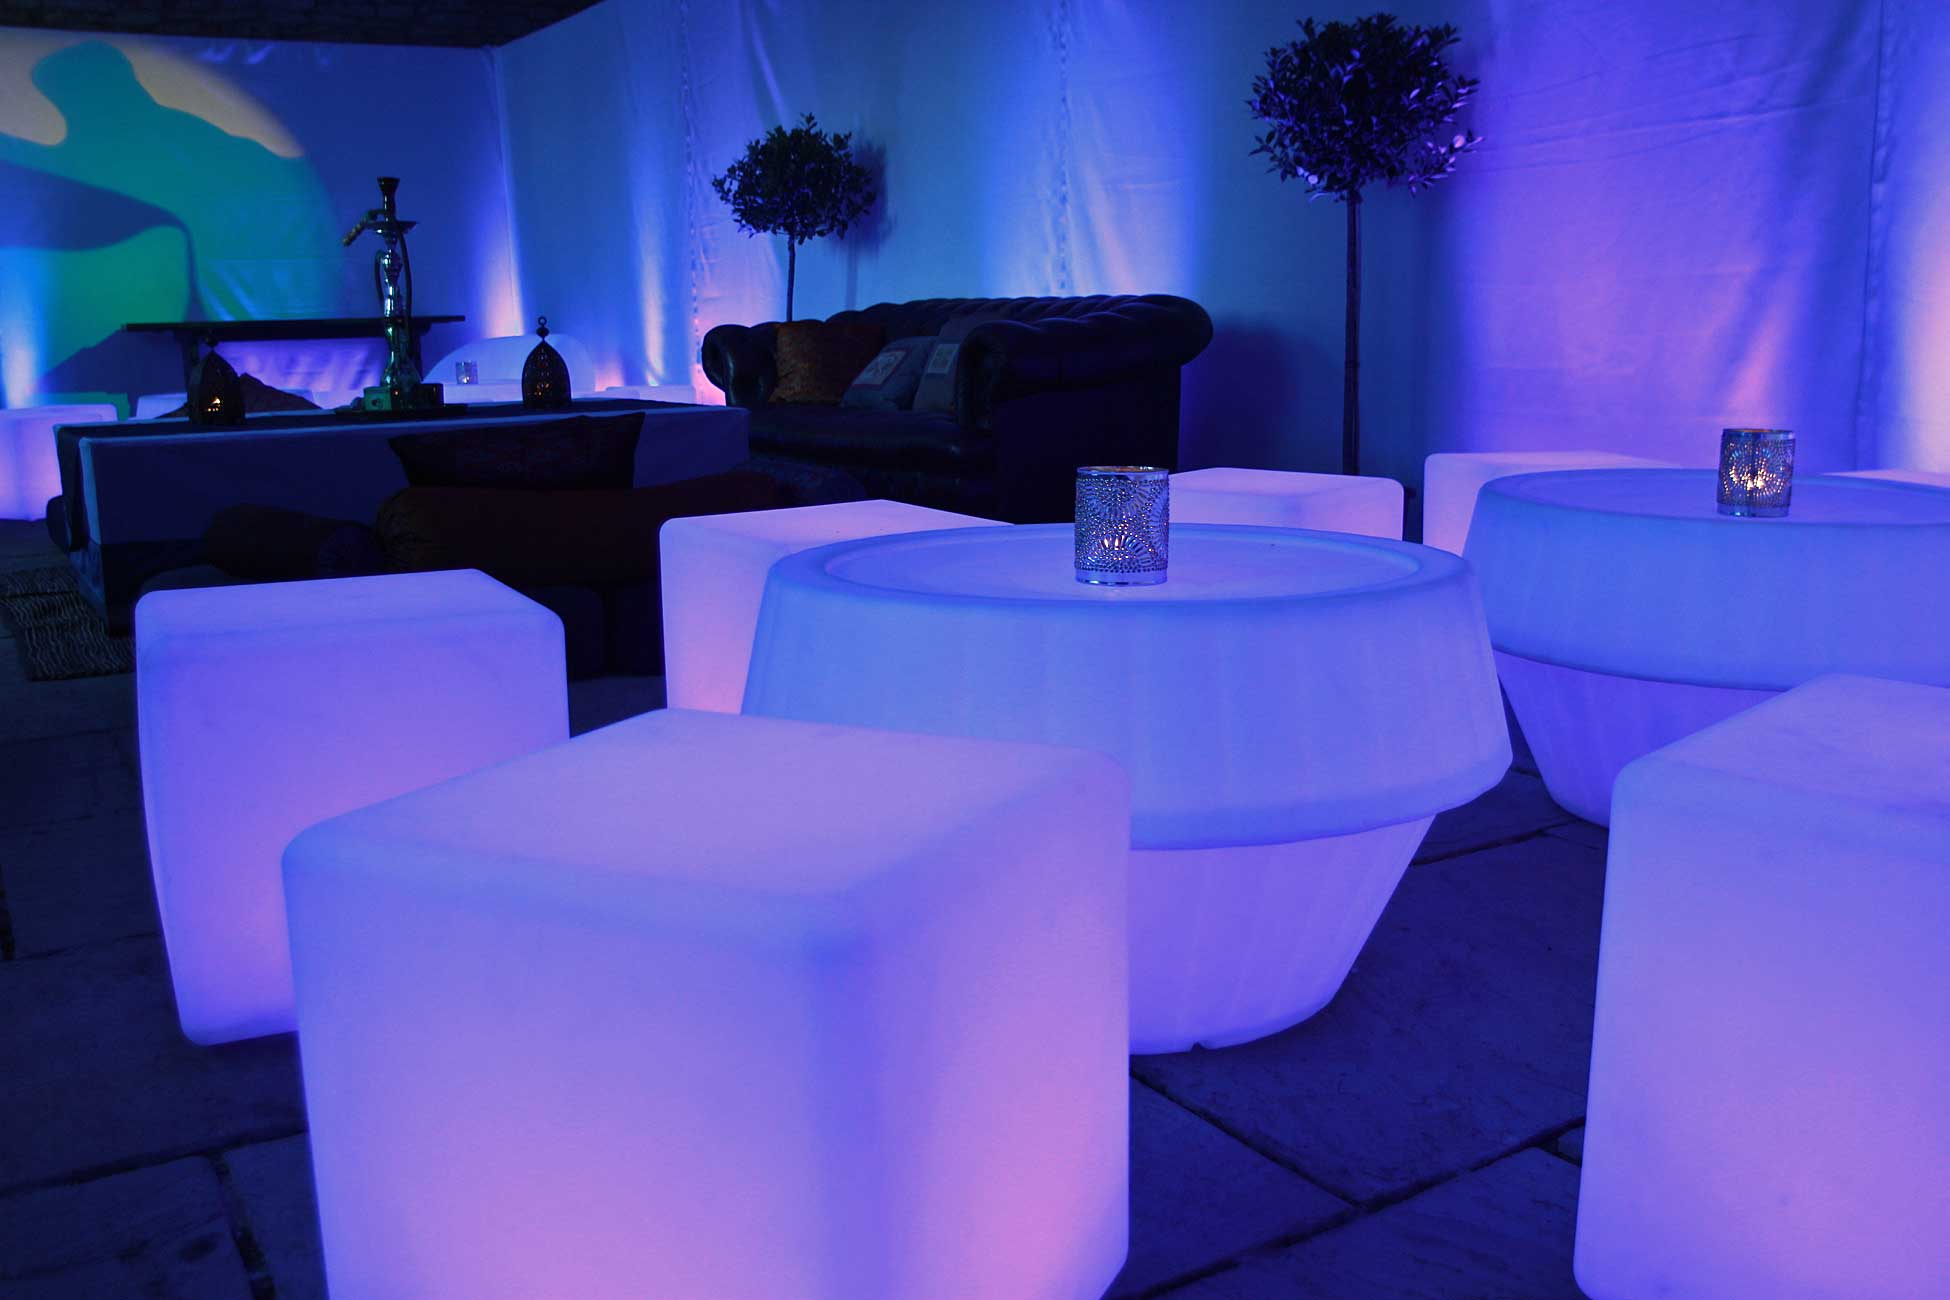 Image of LED furniture with Shisha Pipes and topiary